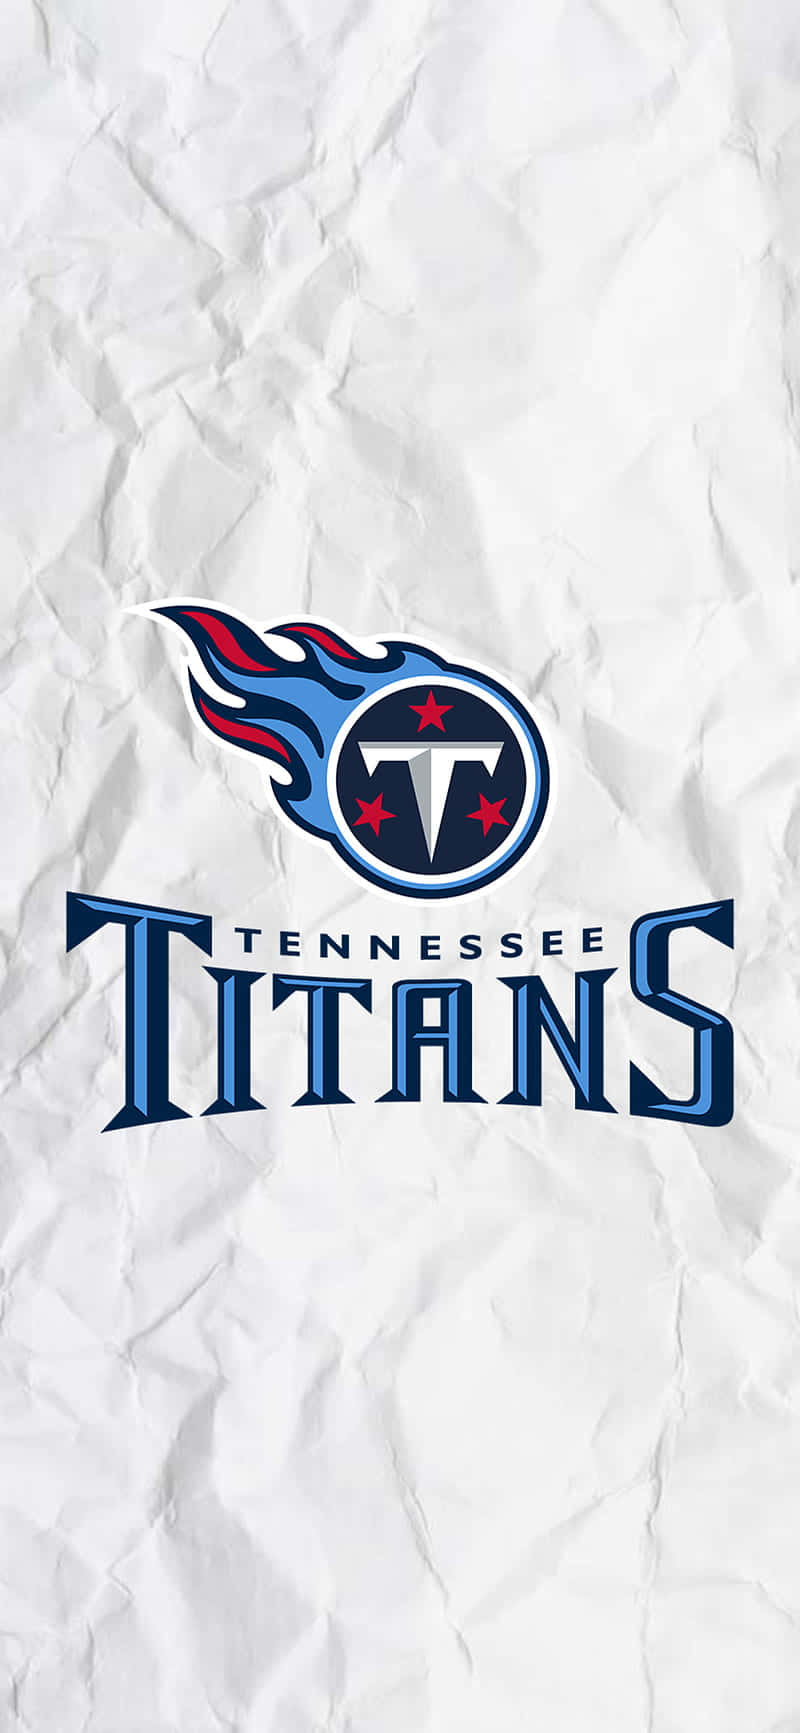 Get Fired up for Tennessee Titans football action with this official team wallpaper for your iPhone! Wallpaper